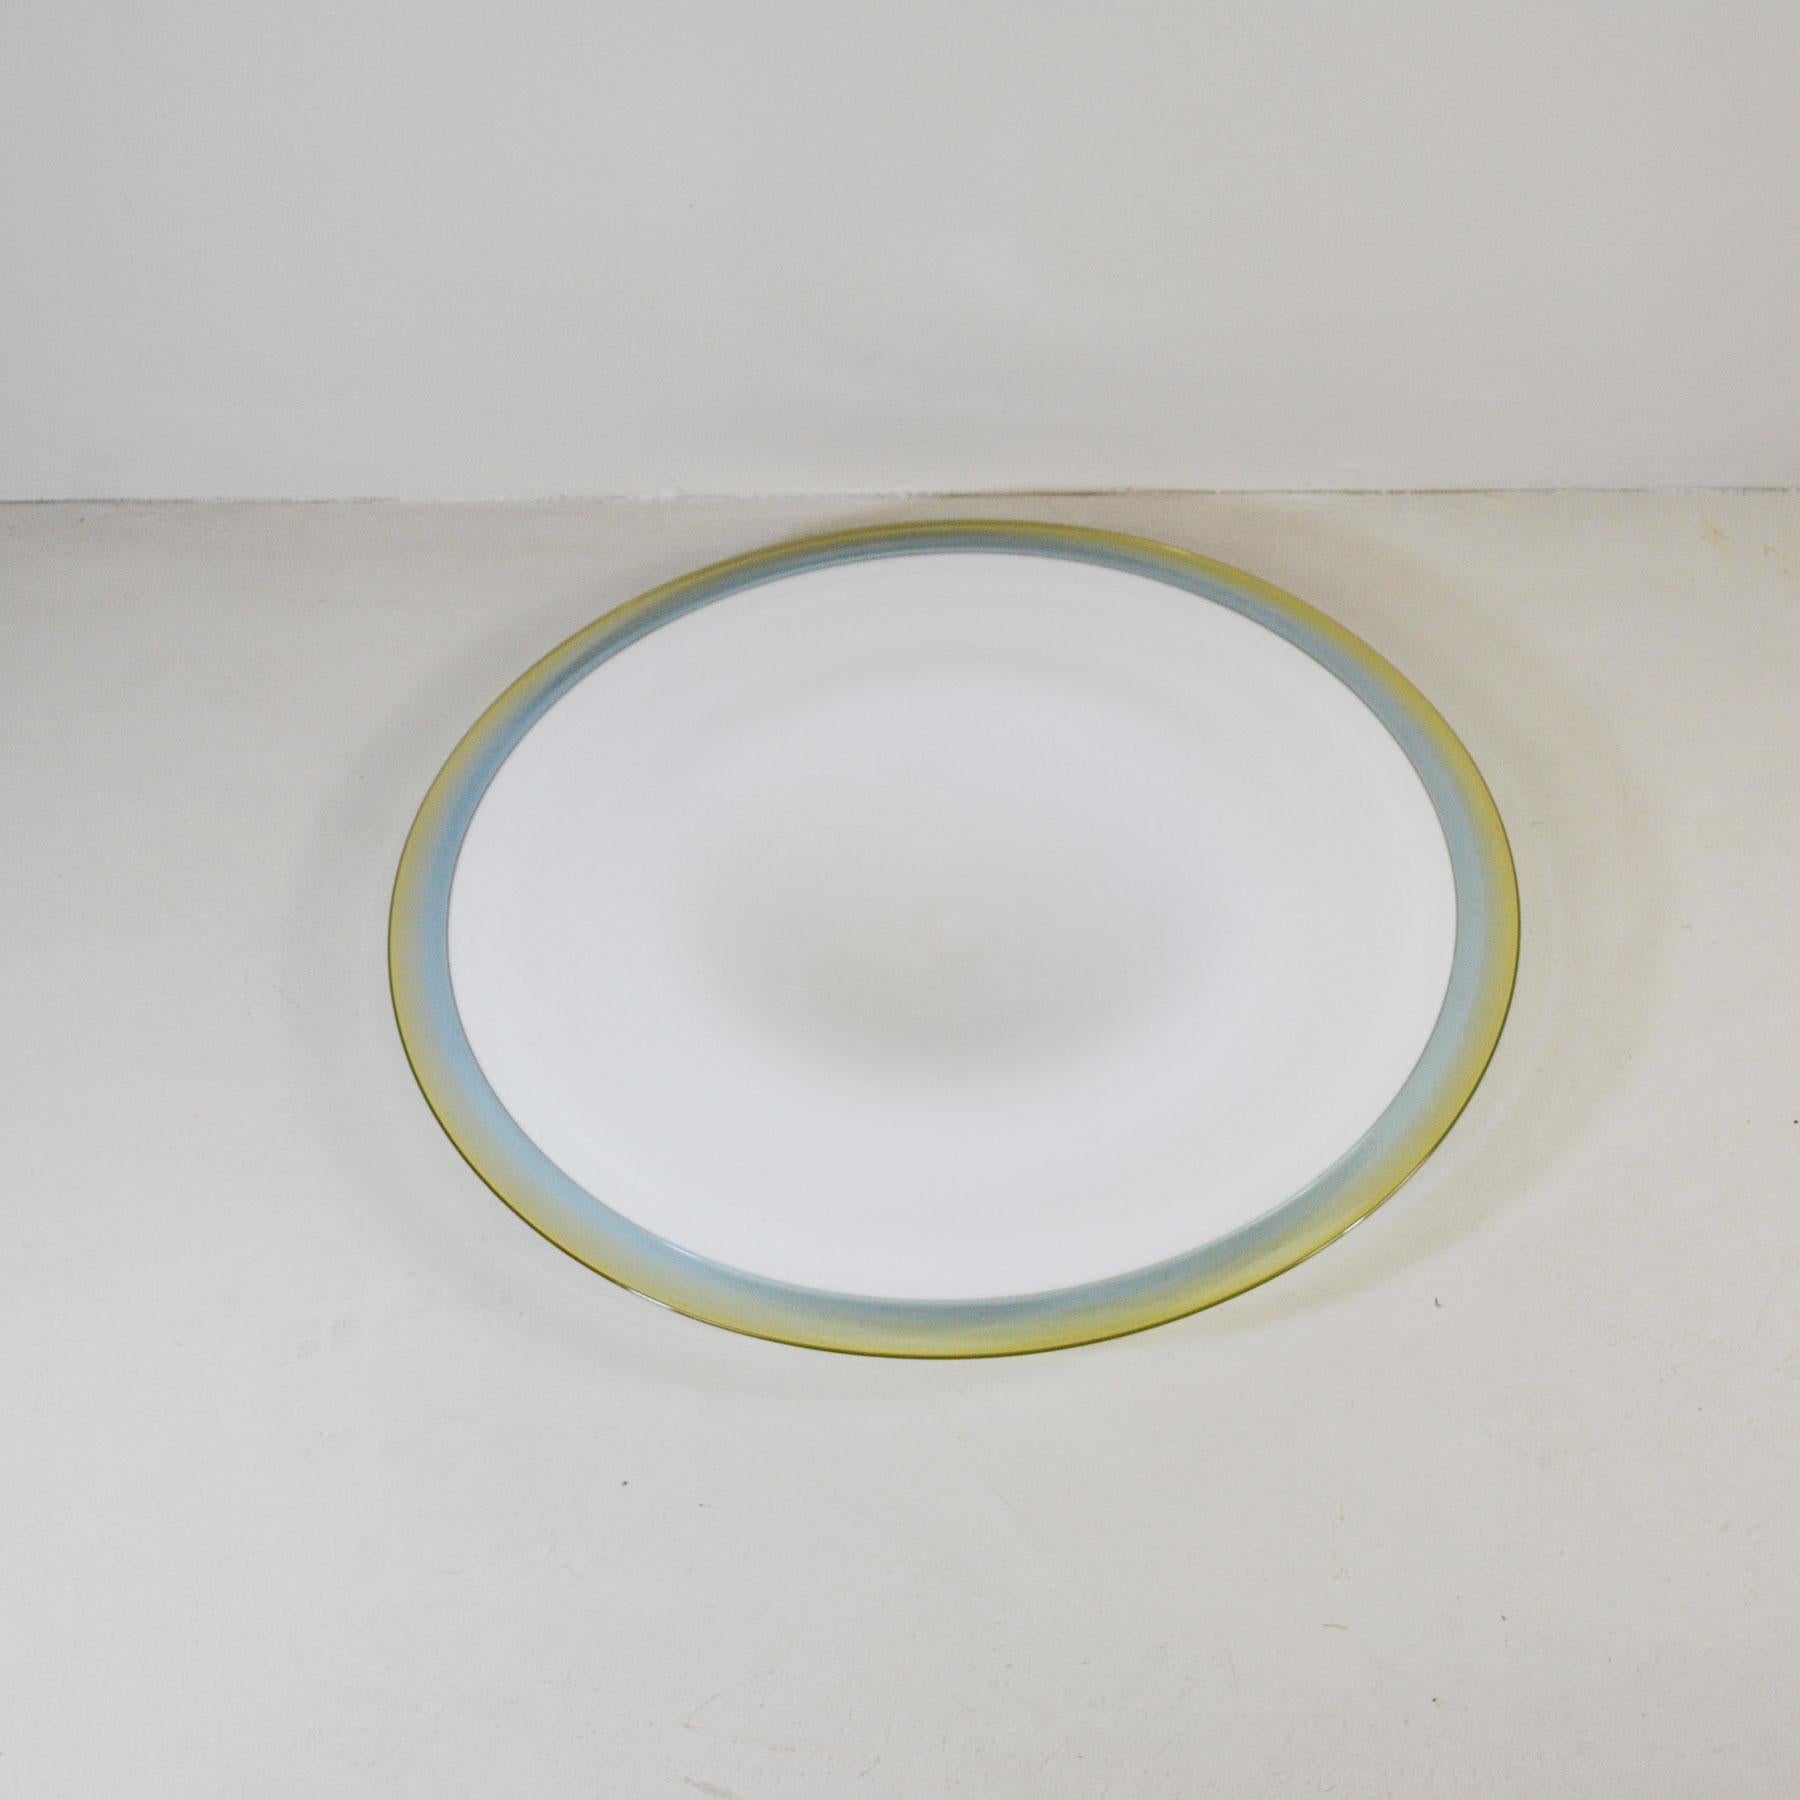 Italian midcentury large glass dishe from the 1960s. The plate is in white enamel glass in the center and colored in its circumference.